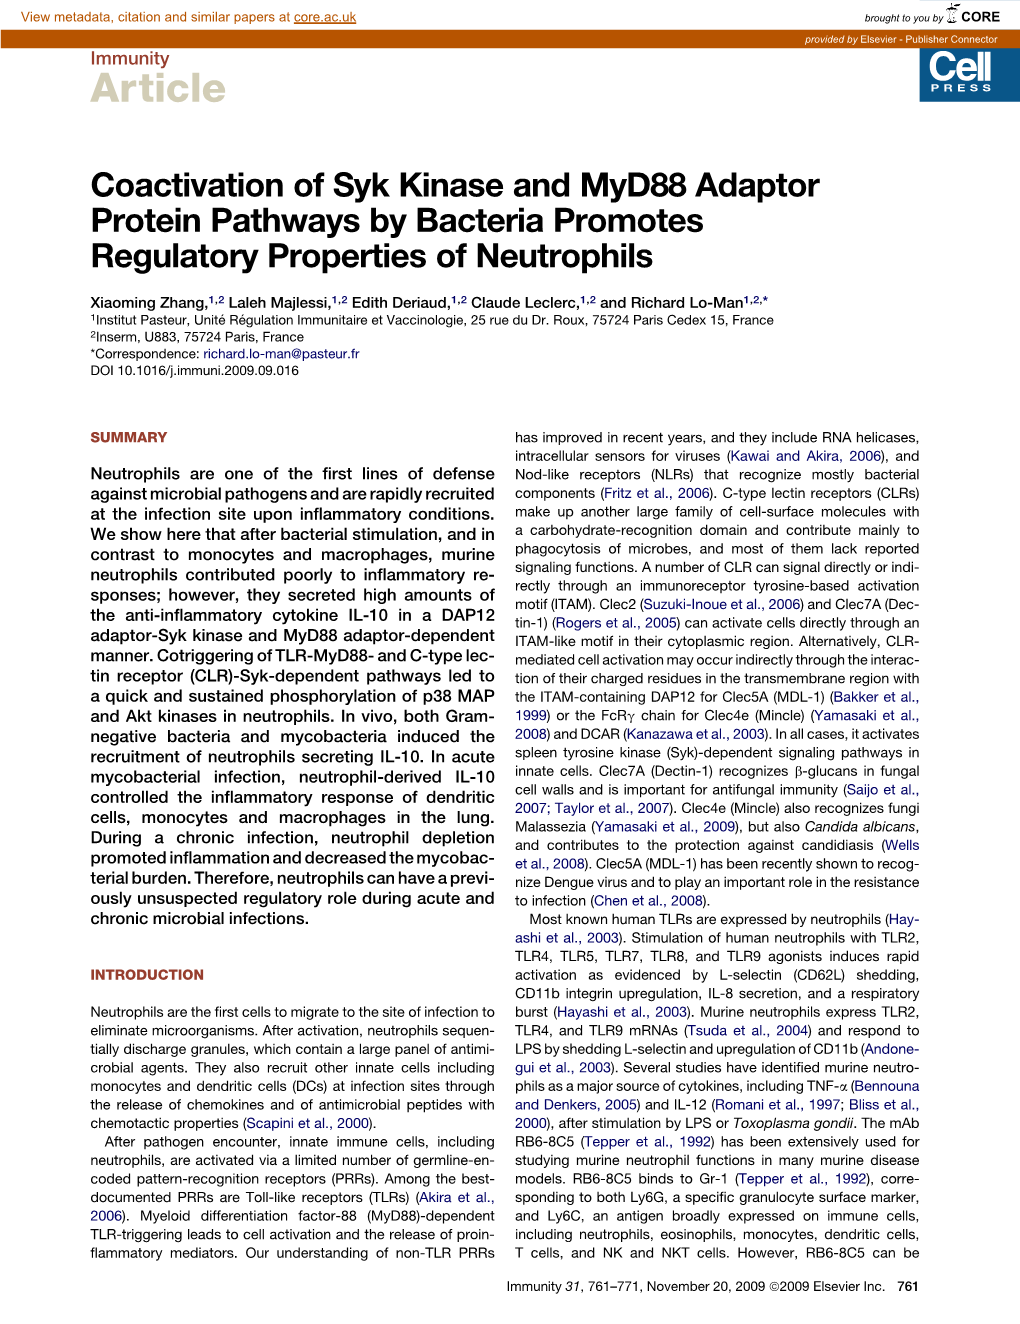 Coactivation of Syk Kinase and Myd88 Adaptor Protein Pathways by Bacteria Promotes Regulatory Properties of Neutrophils